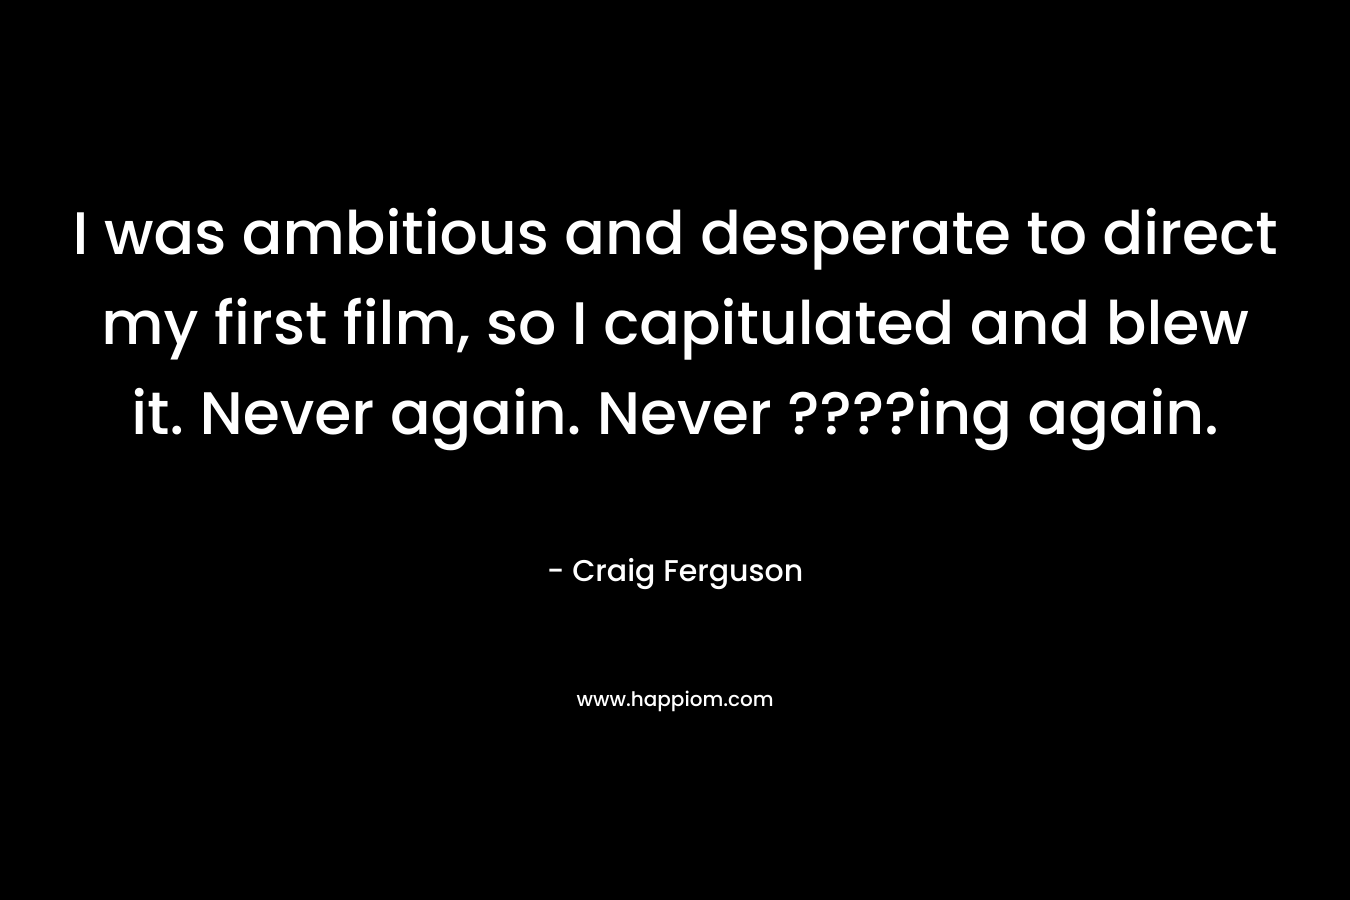 I was ambitious and desperate to direct my first film, so I capitulated and blew it. Never again. Never ????ing again. – Craig Ferguson